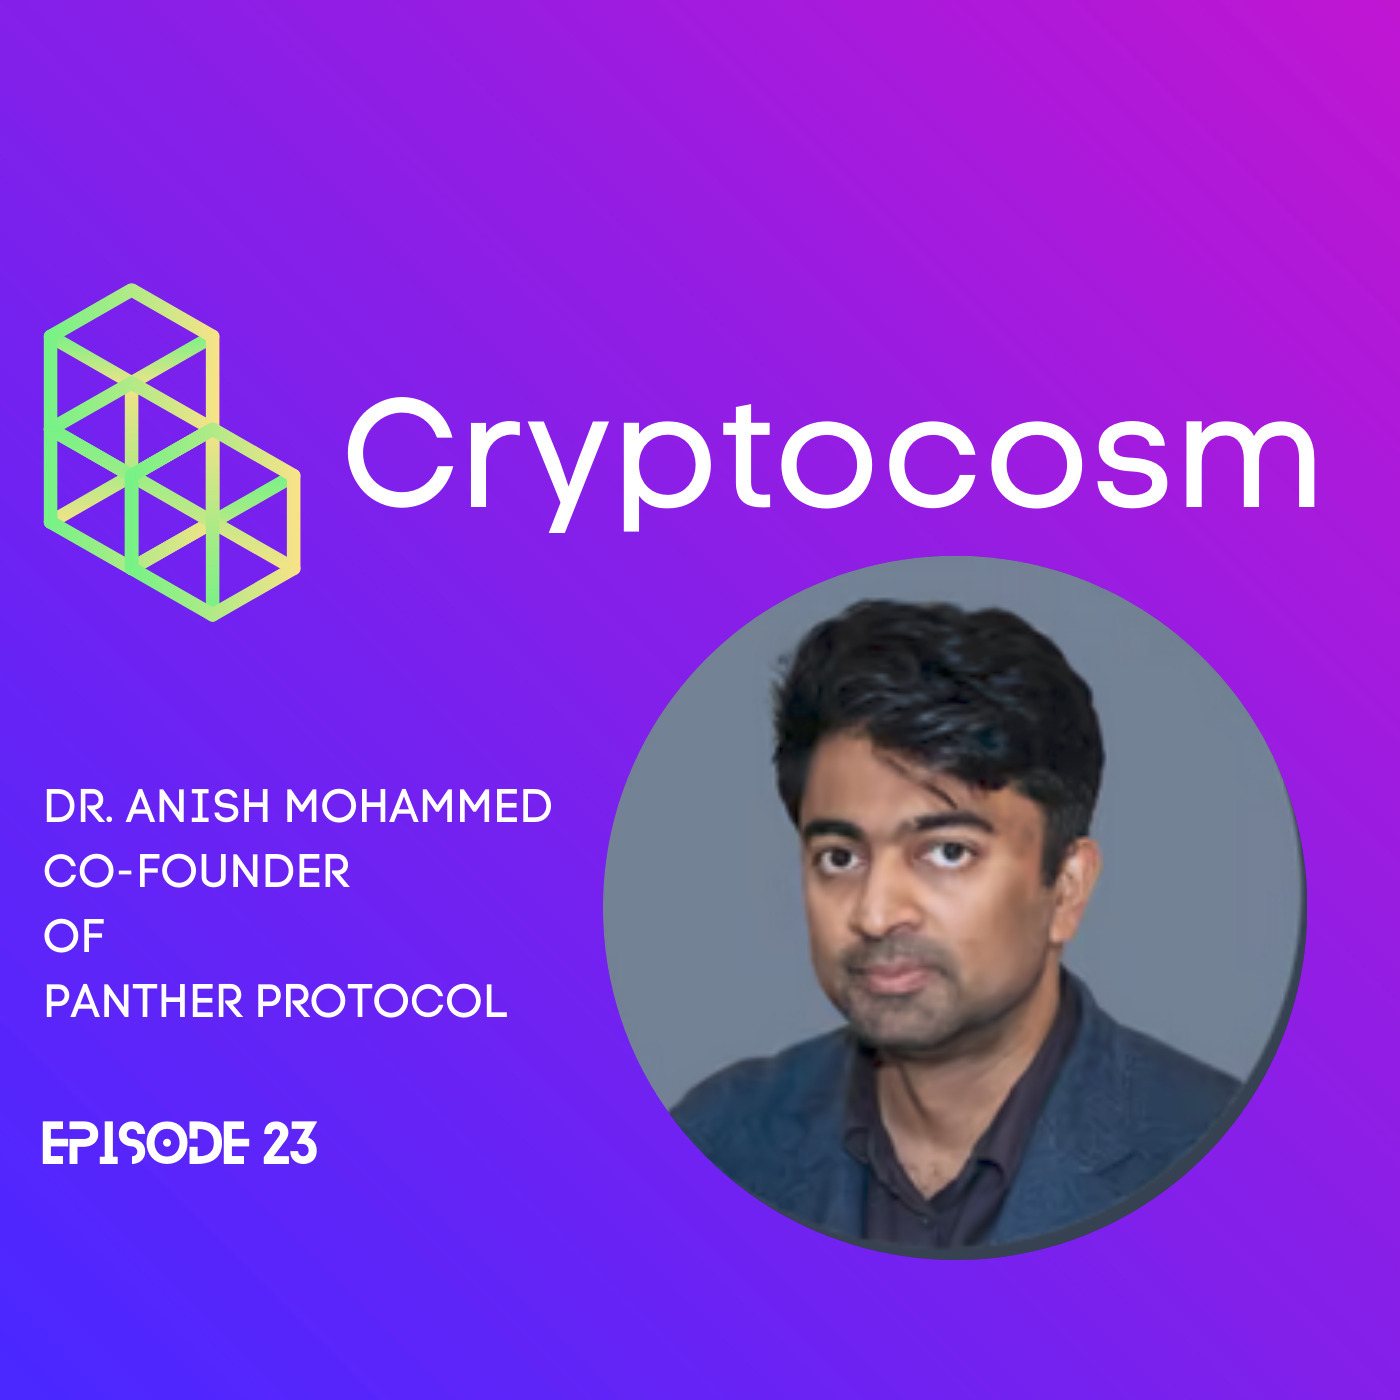 Fireside Chat With Dr. Anish Mohammed - ZKP, Authenticity, Privacy & His Thoughts In The Crypto/Blockchain Space